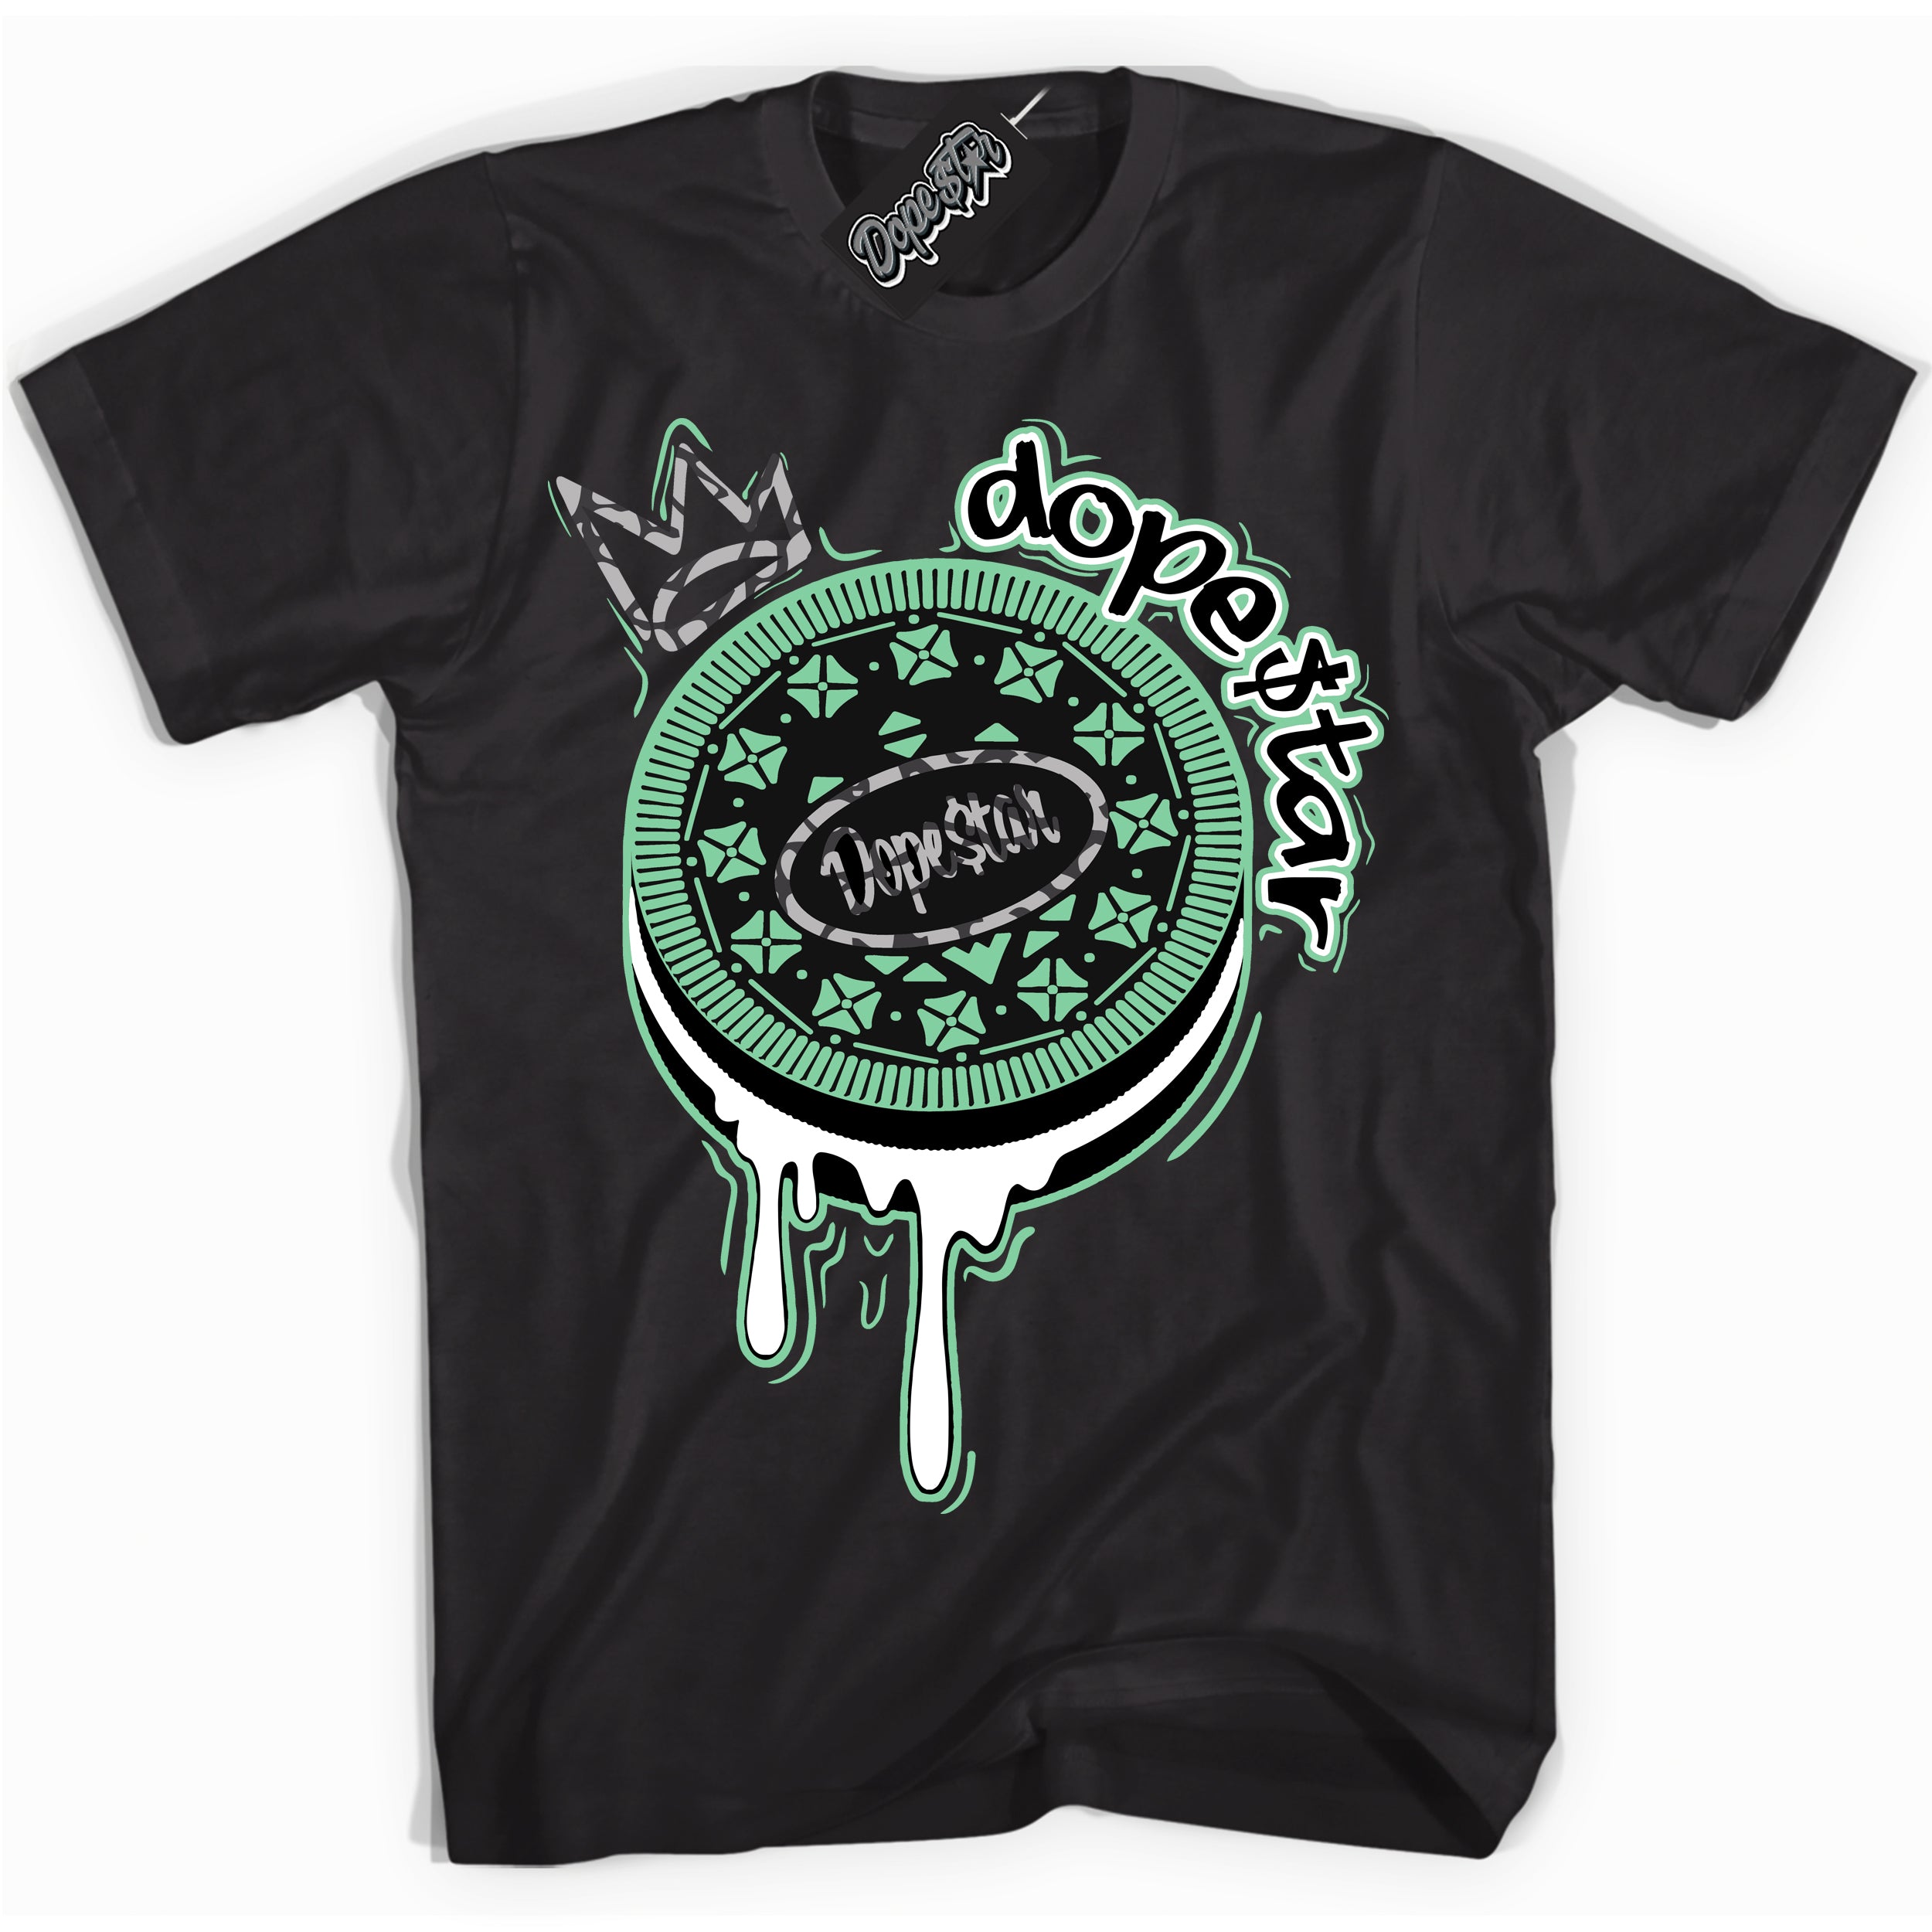 Cool Black graphic tee with “ Oreo DS ” design, that perfectly matches Green Glow 3s sneakers 